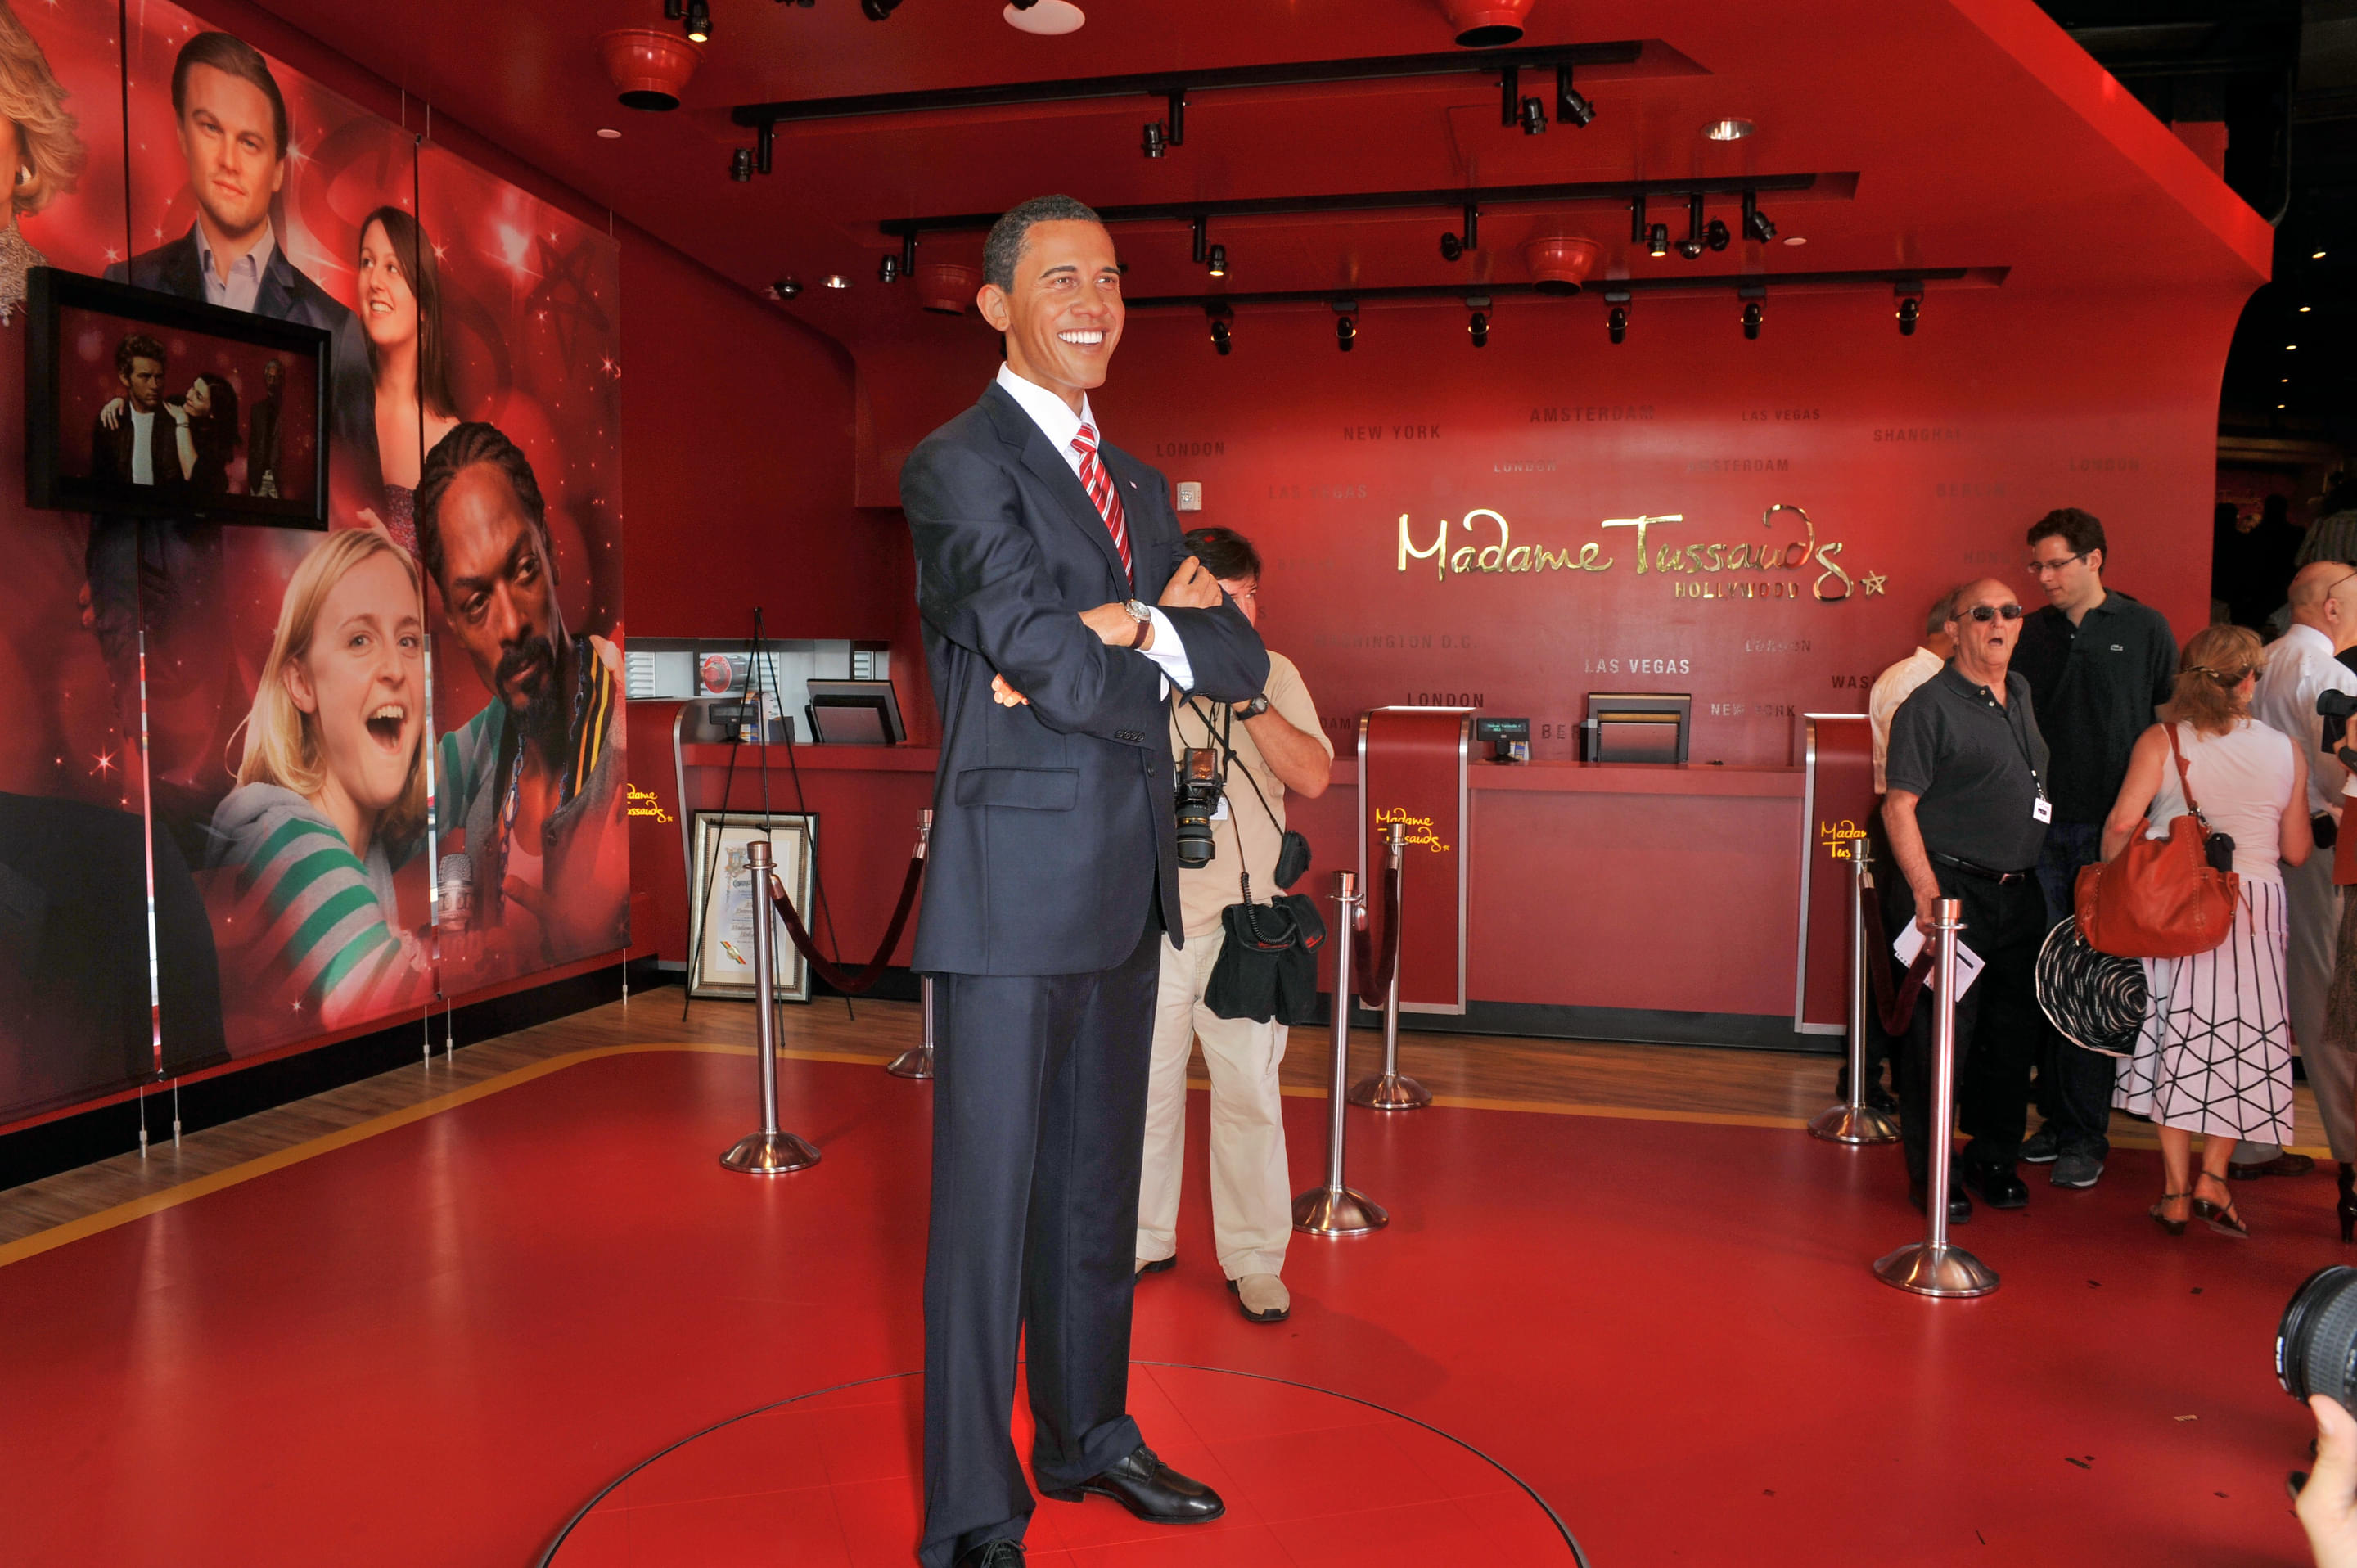 Madame Tussauds Hollywood Overview